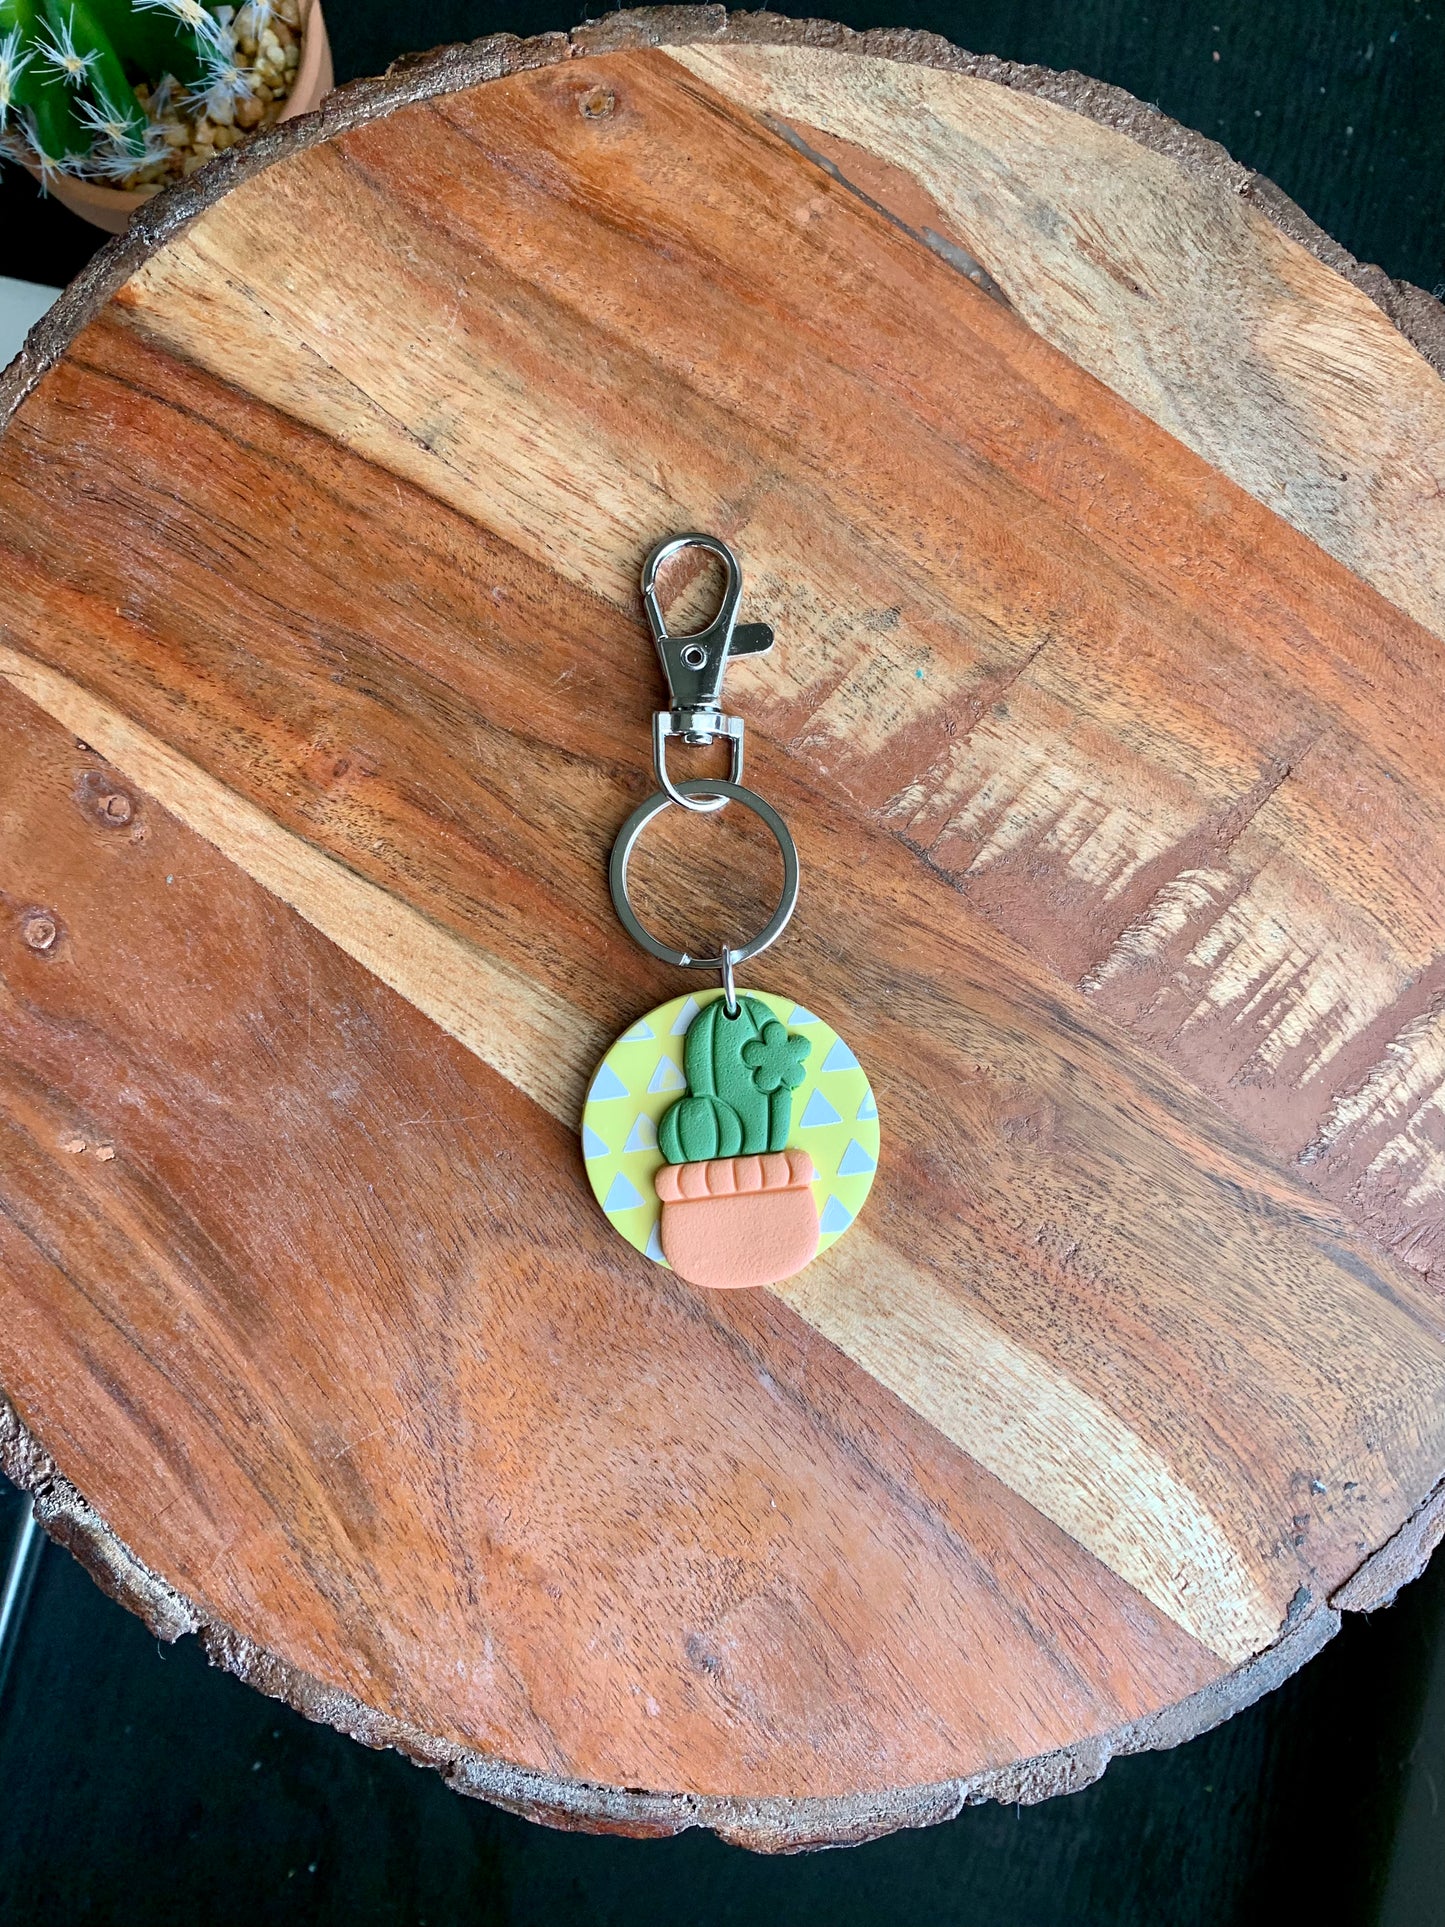 Potted Cactus Keychains